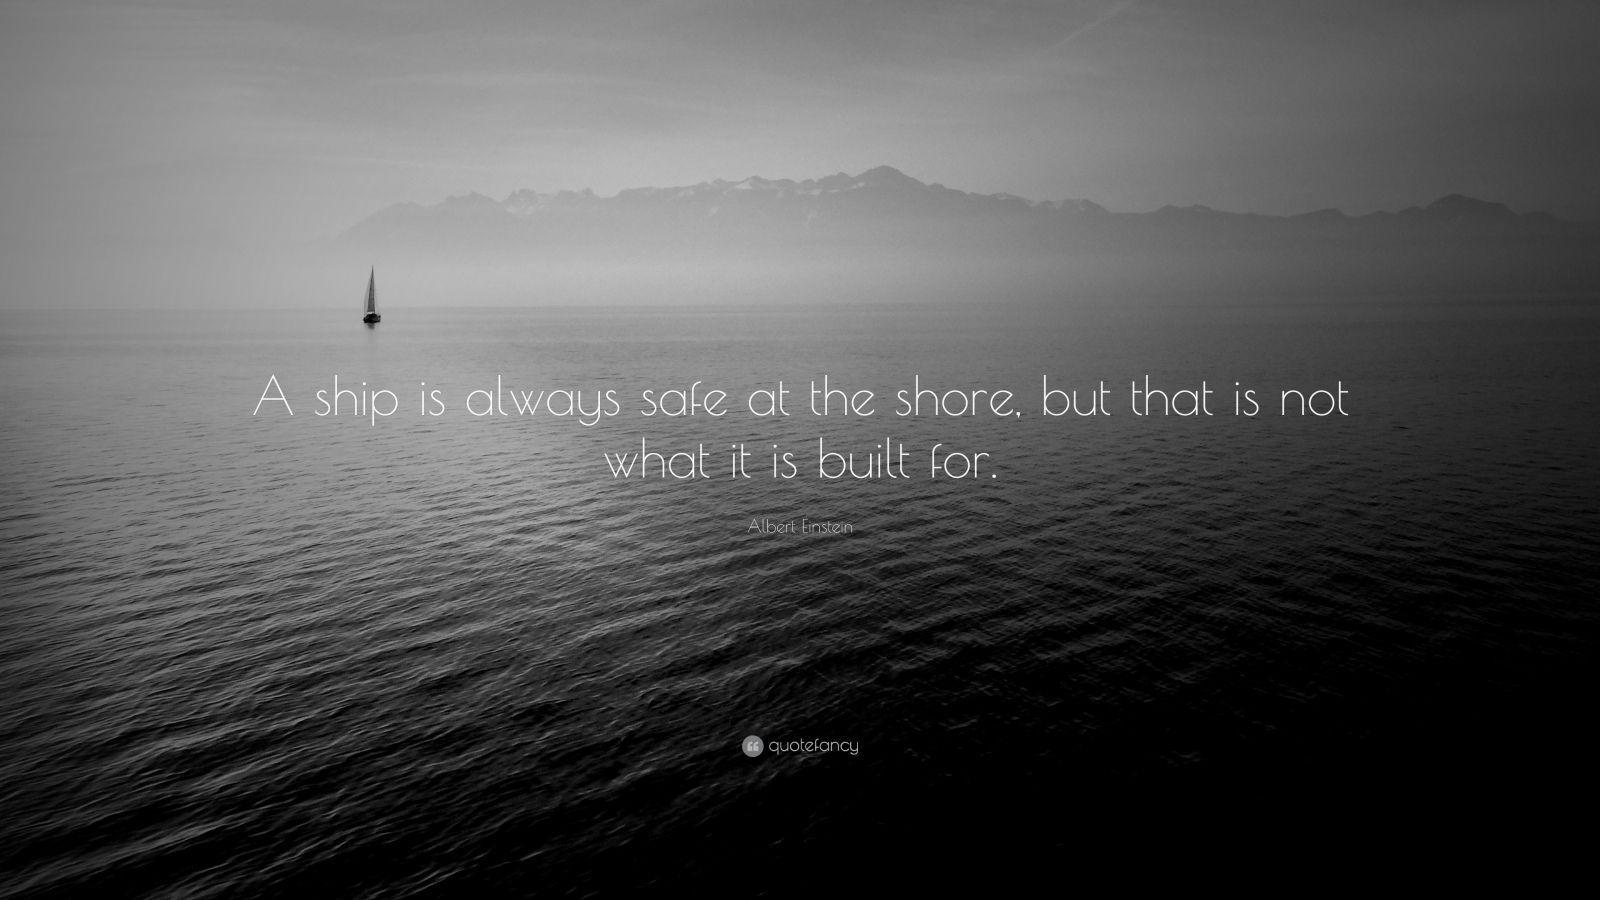 Quotefancy: Wallpaper With Inspirational Quotes